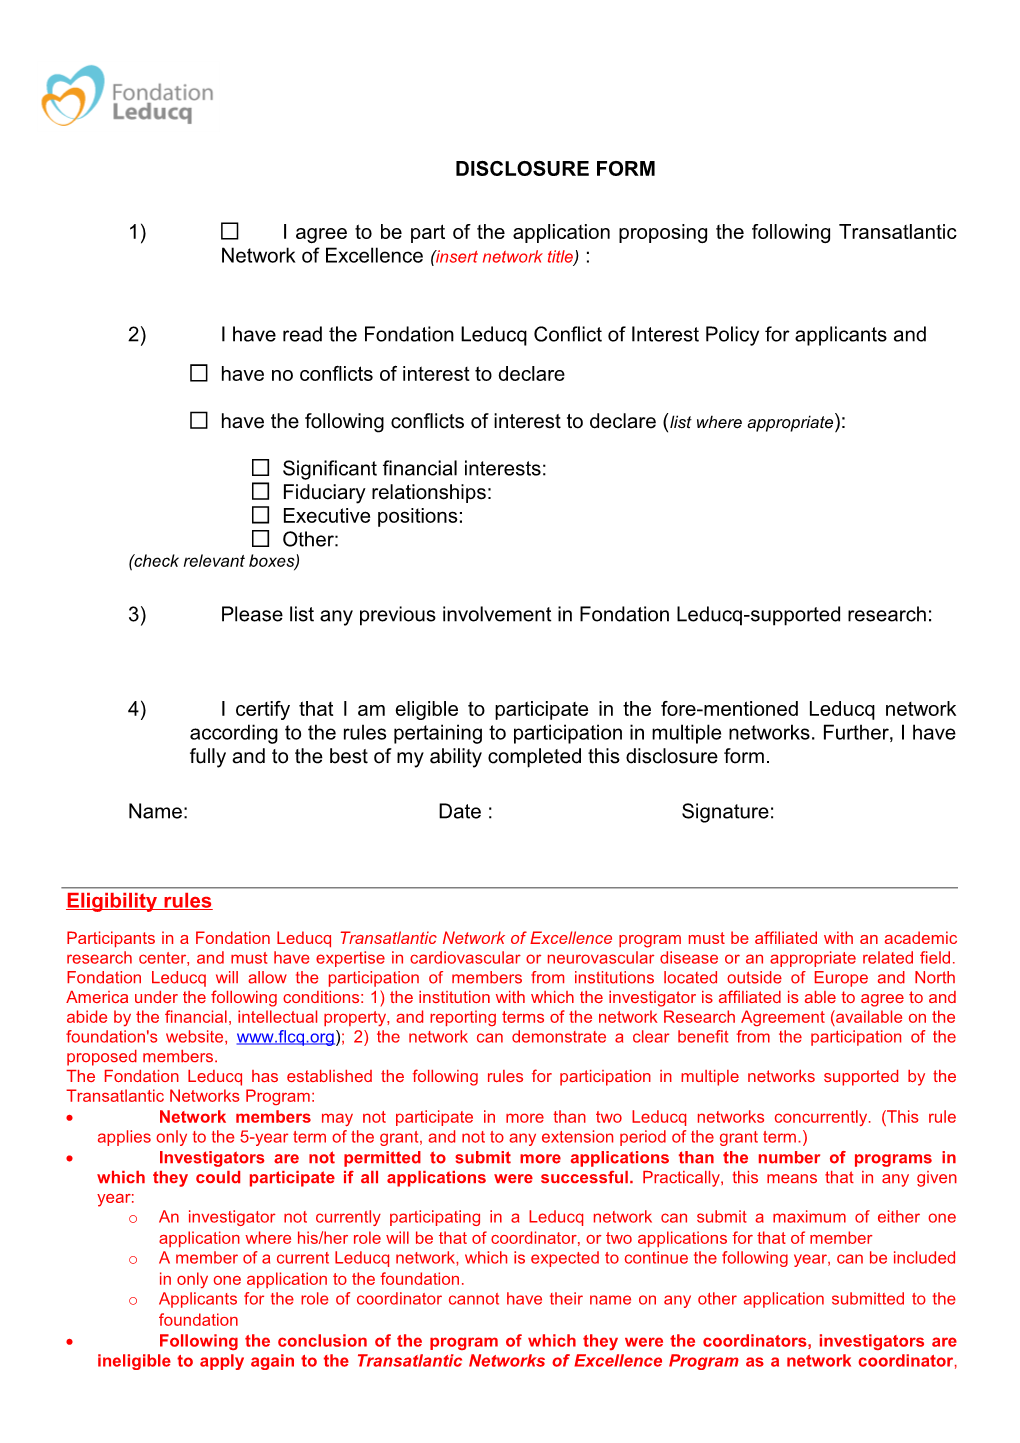 Disclosure Form for Expressions of Interest